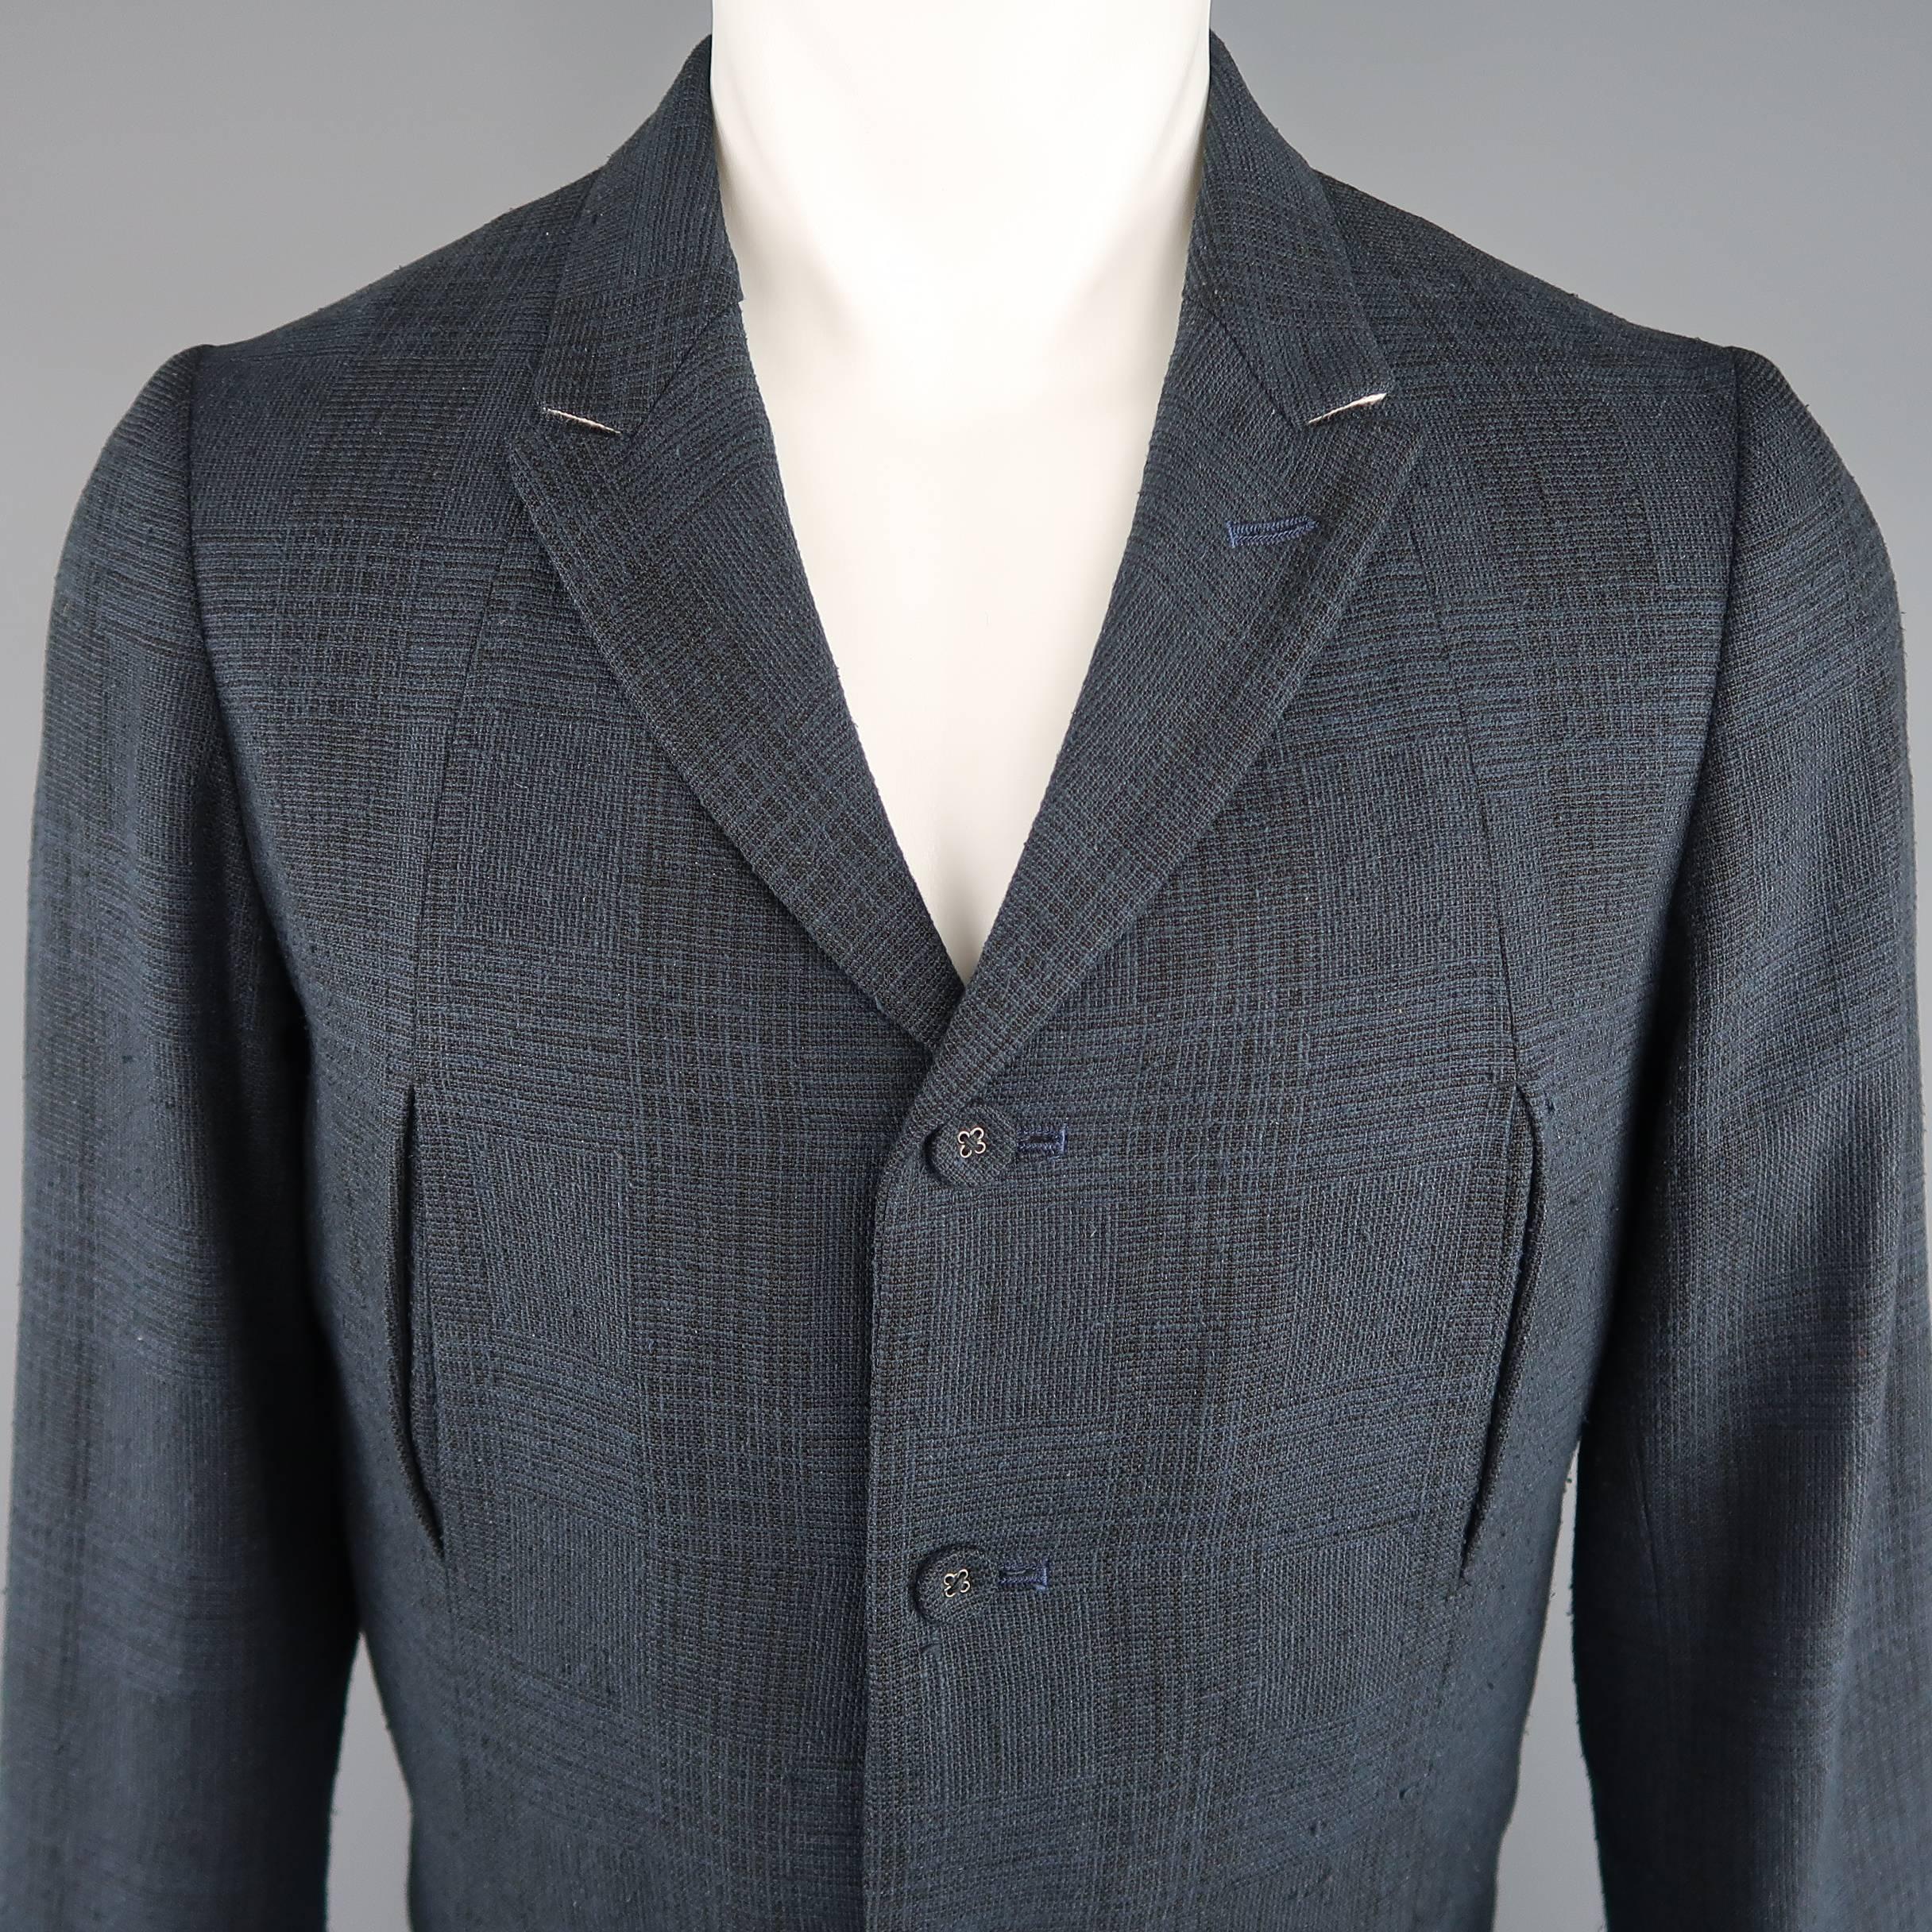 THE VIRDI-ANNE sport coat comes in a navy and black plaid silk linen blend canvas and features a small peak lapel, four button closure, four slit pocket front, and folded cuffs. Wear throughout Fabric. Made in Japan.
 
Good Pre-Owned